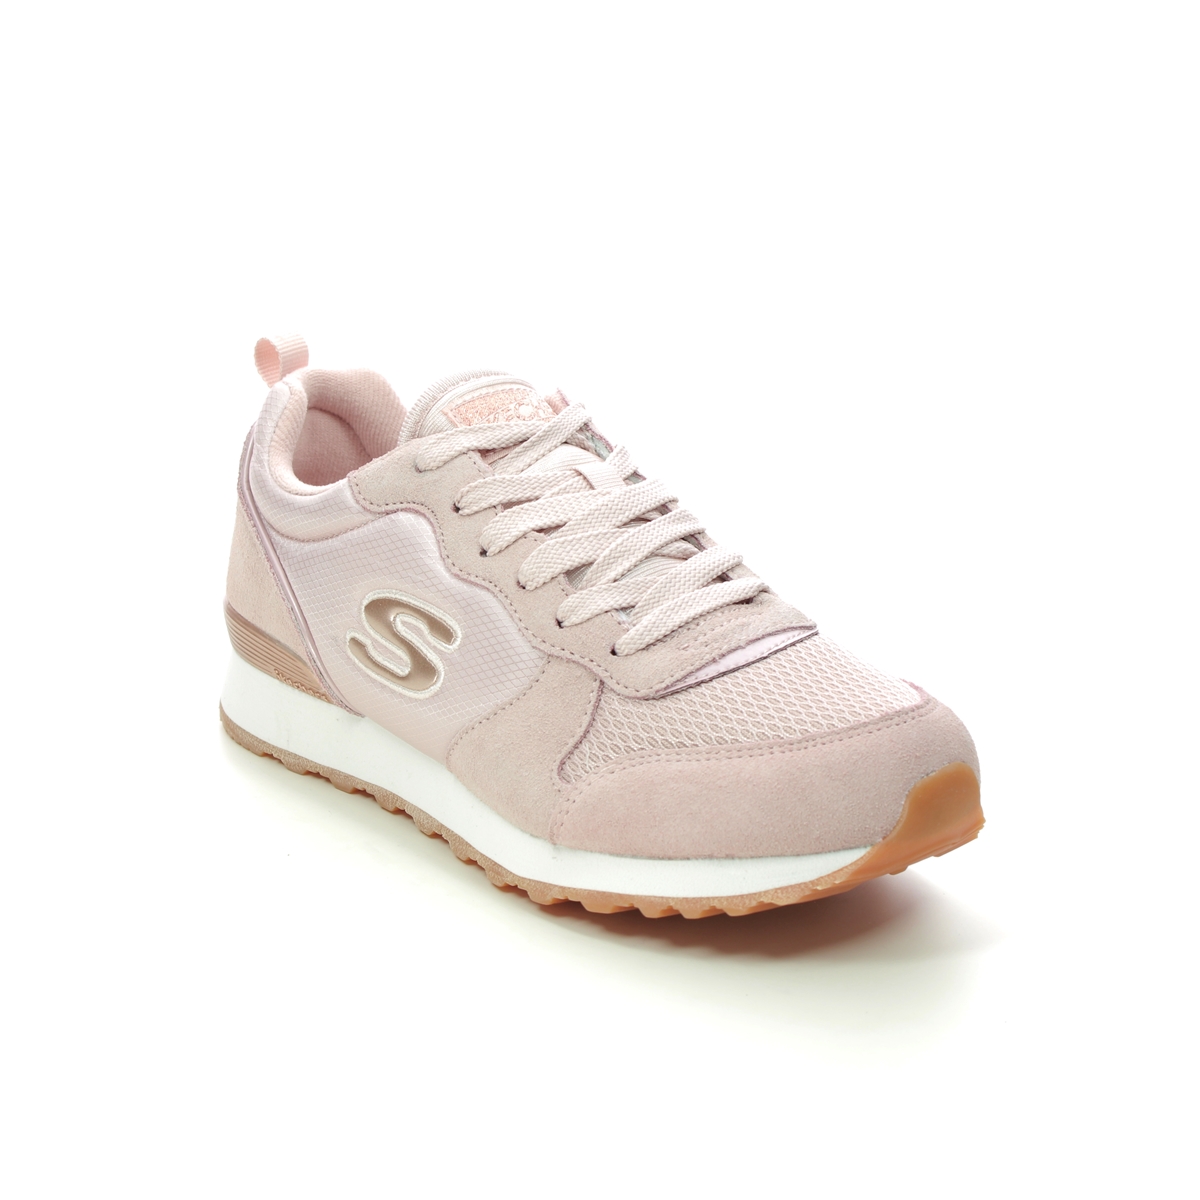 Skechers Og 85 Gold Gurl Blush Pink Womens Trainers 111 In Size 3.5 In Plain Blush Pink